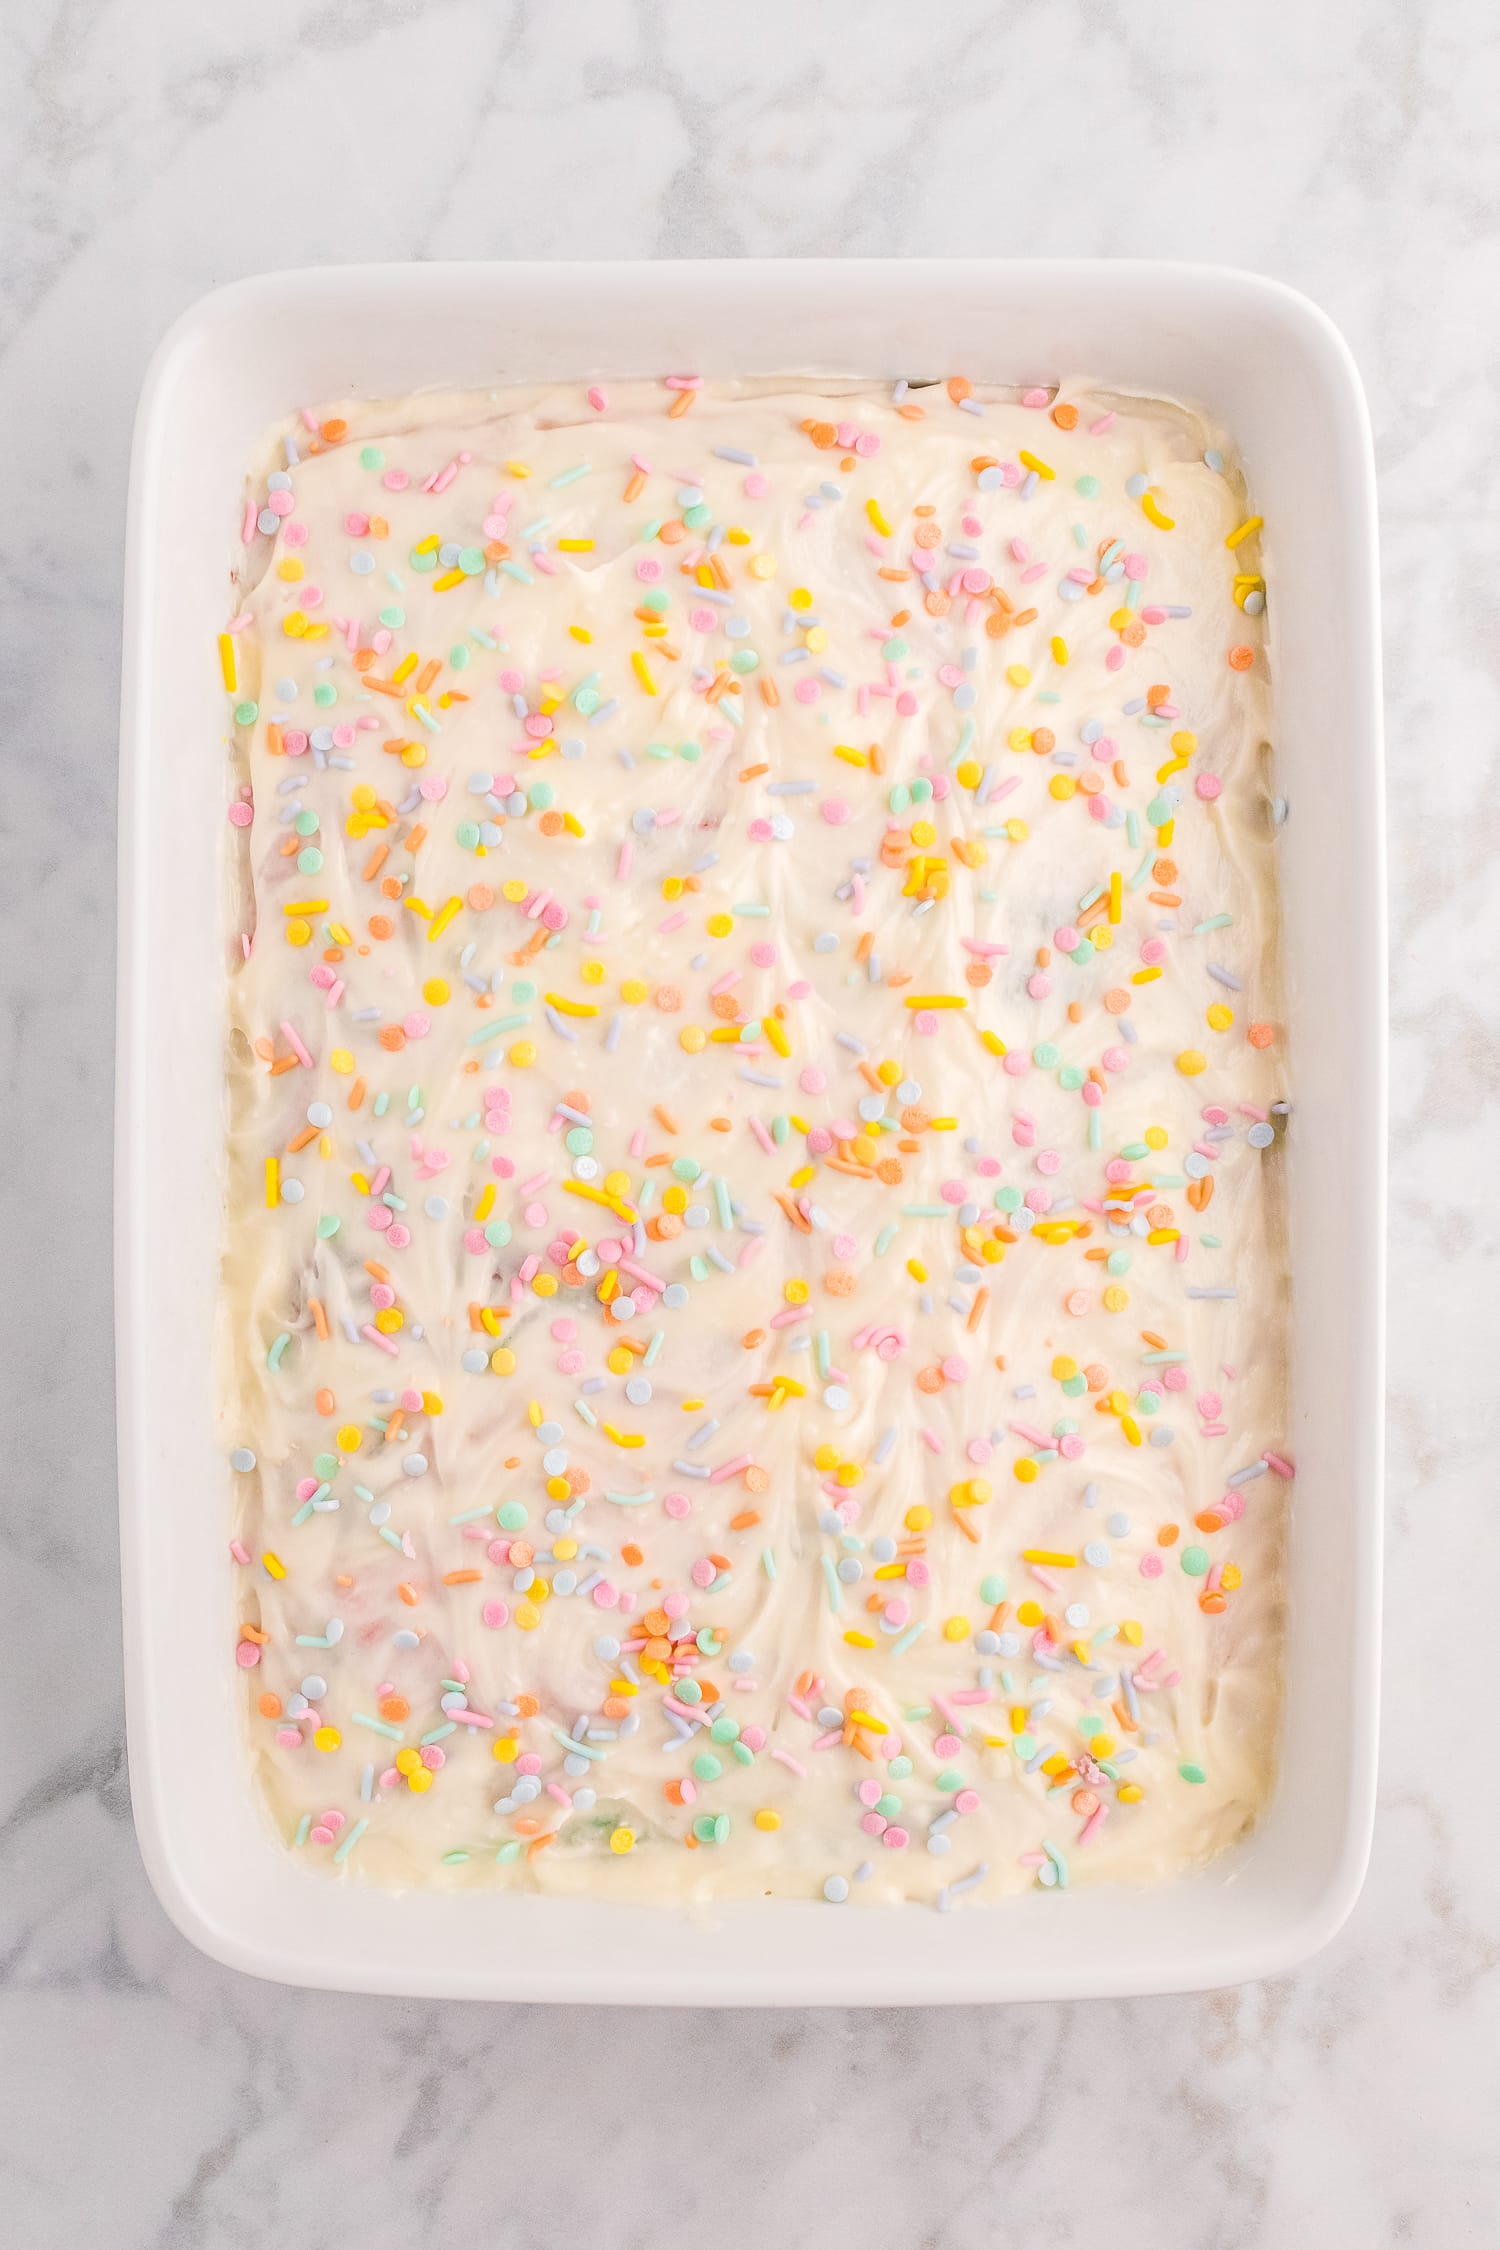 Overhead image of white frosted cake with pastel sprinkles